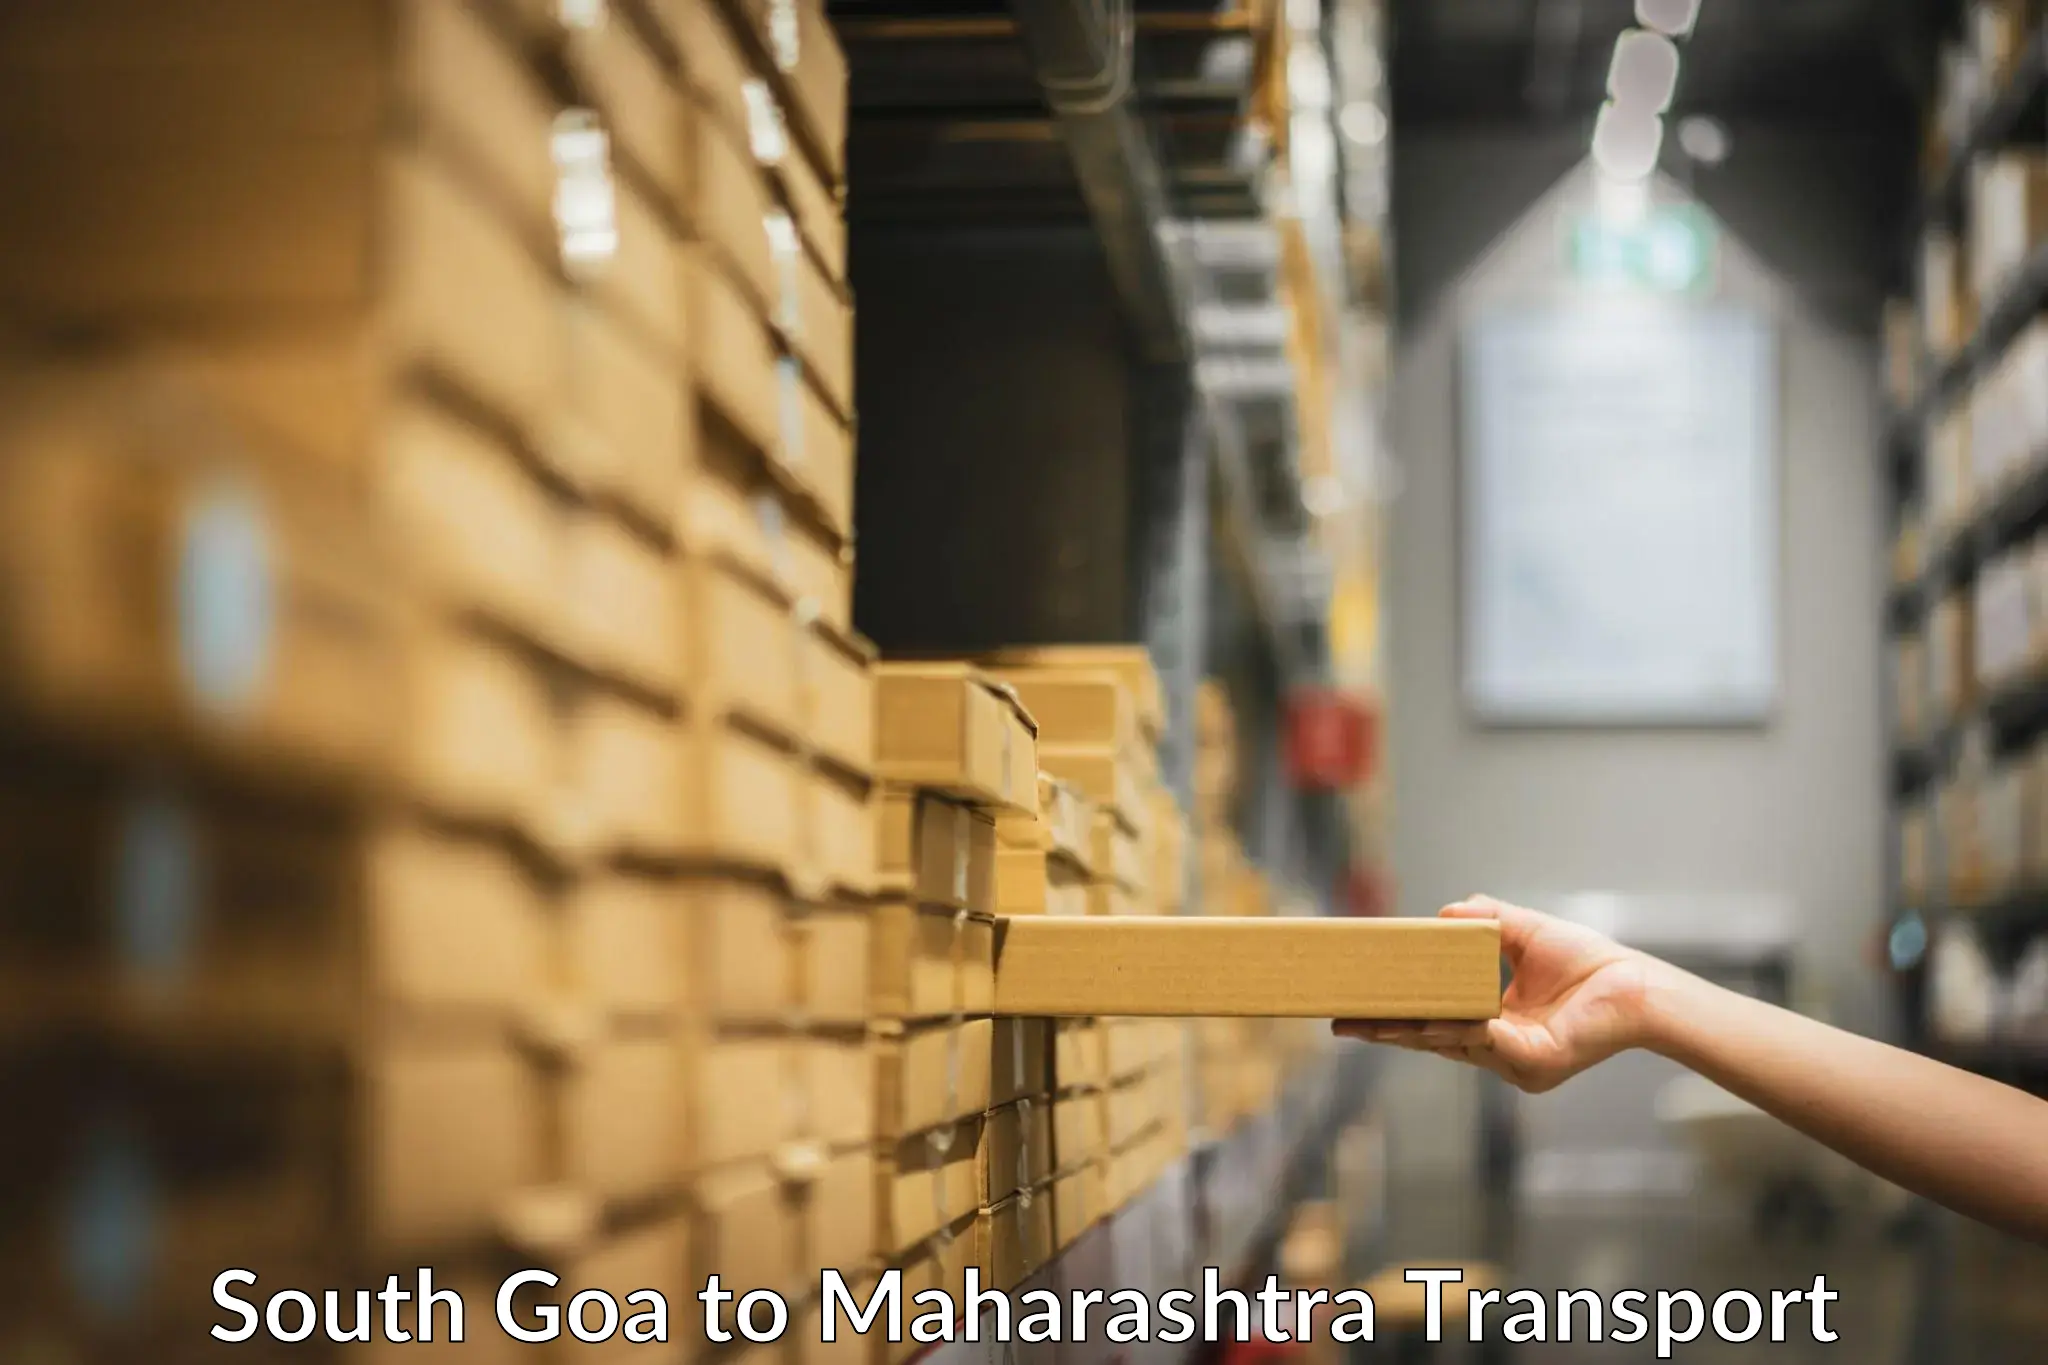 Truck transport companies in India South Goa to Kudus